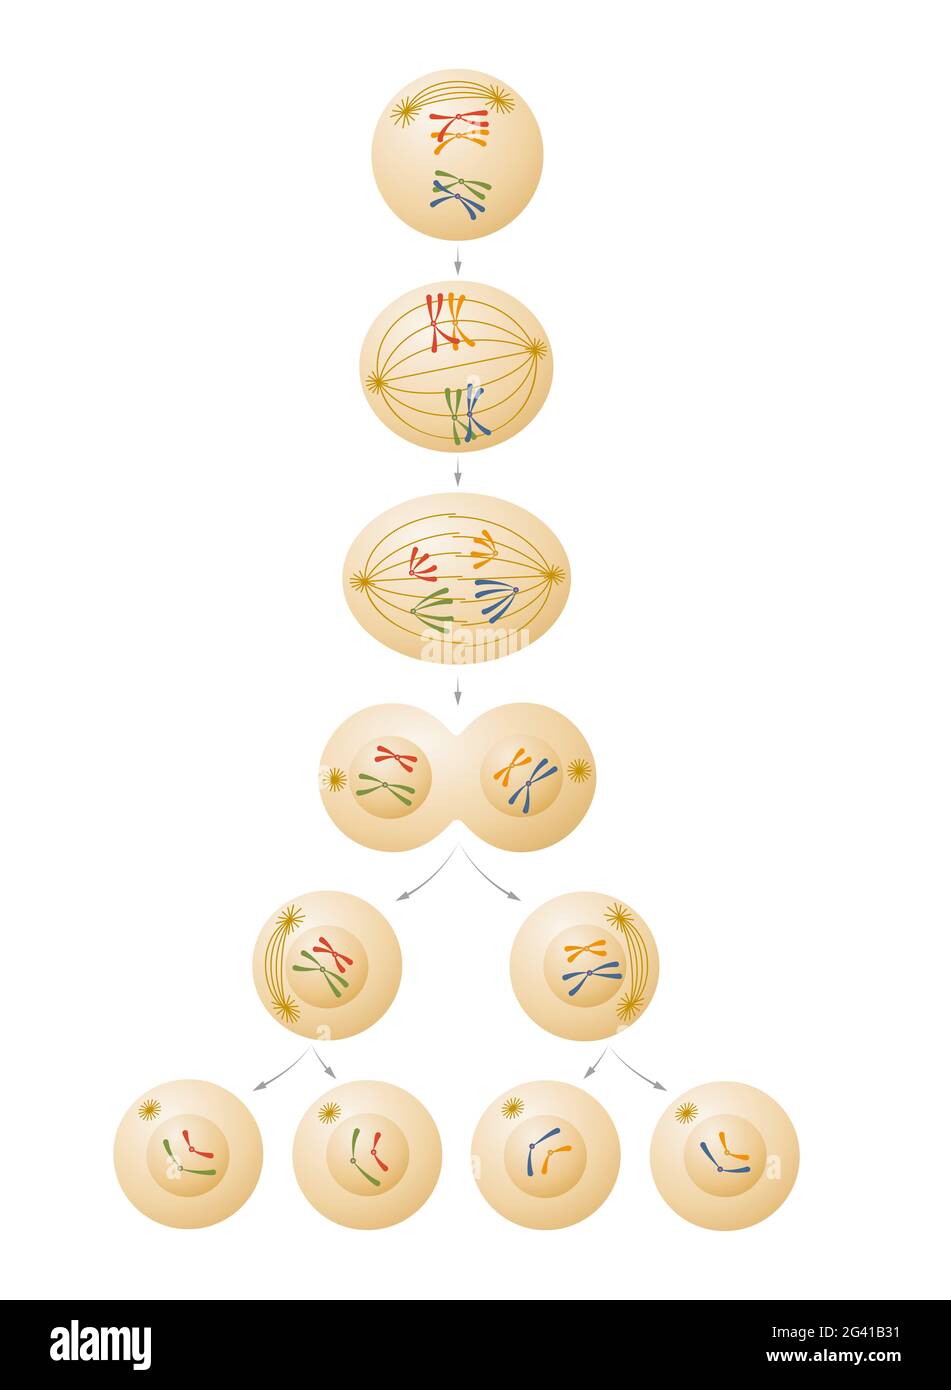 Meiosis cell division illustration Stock Photo